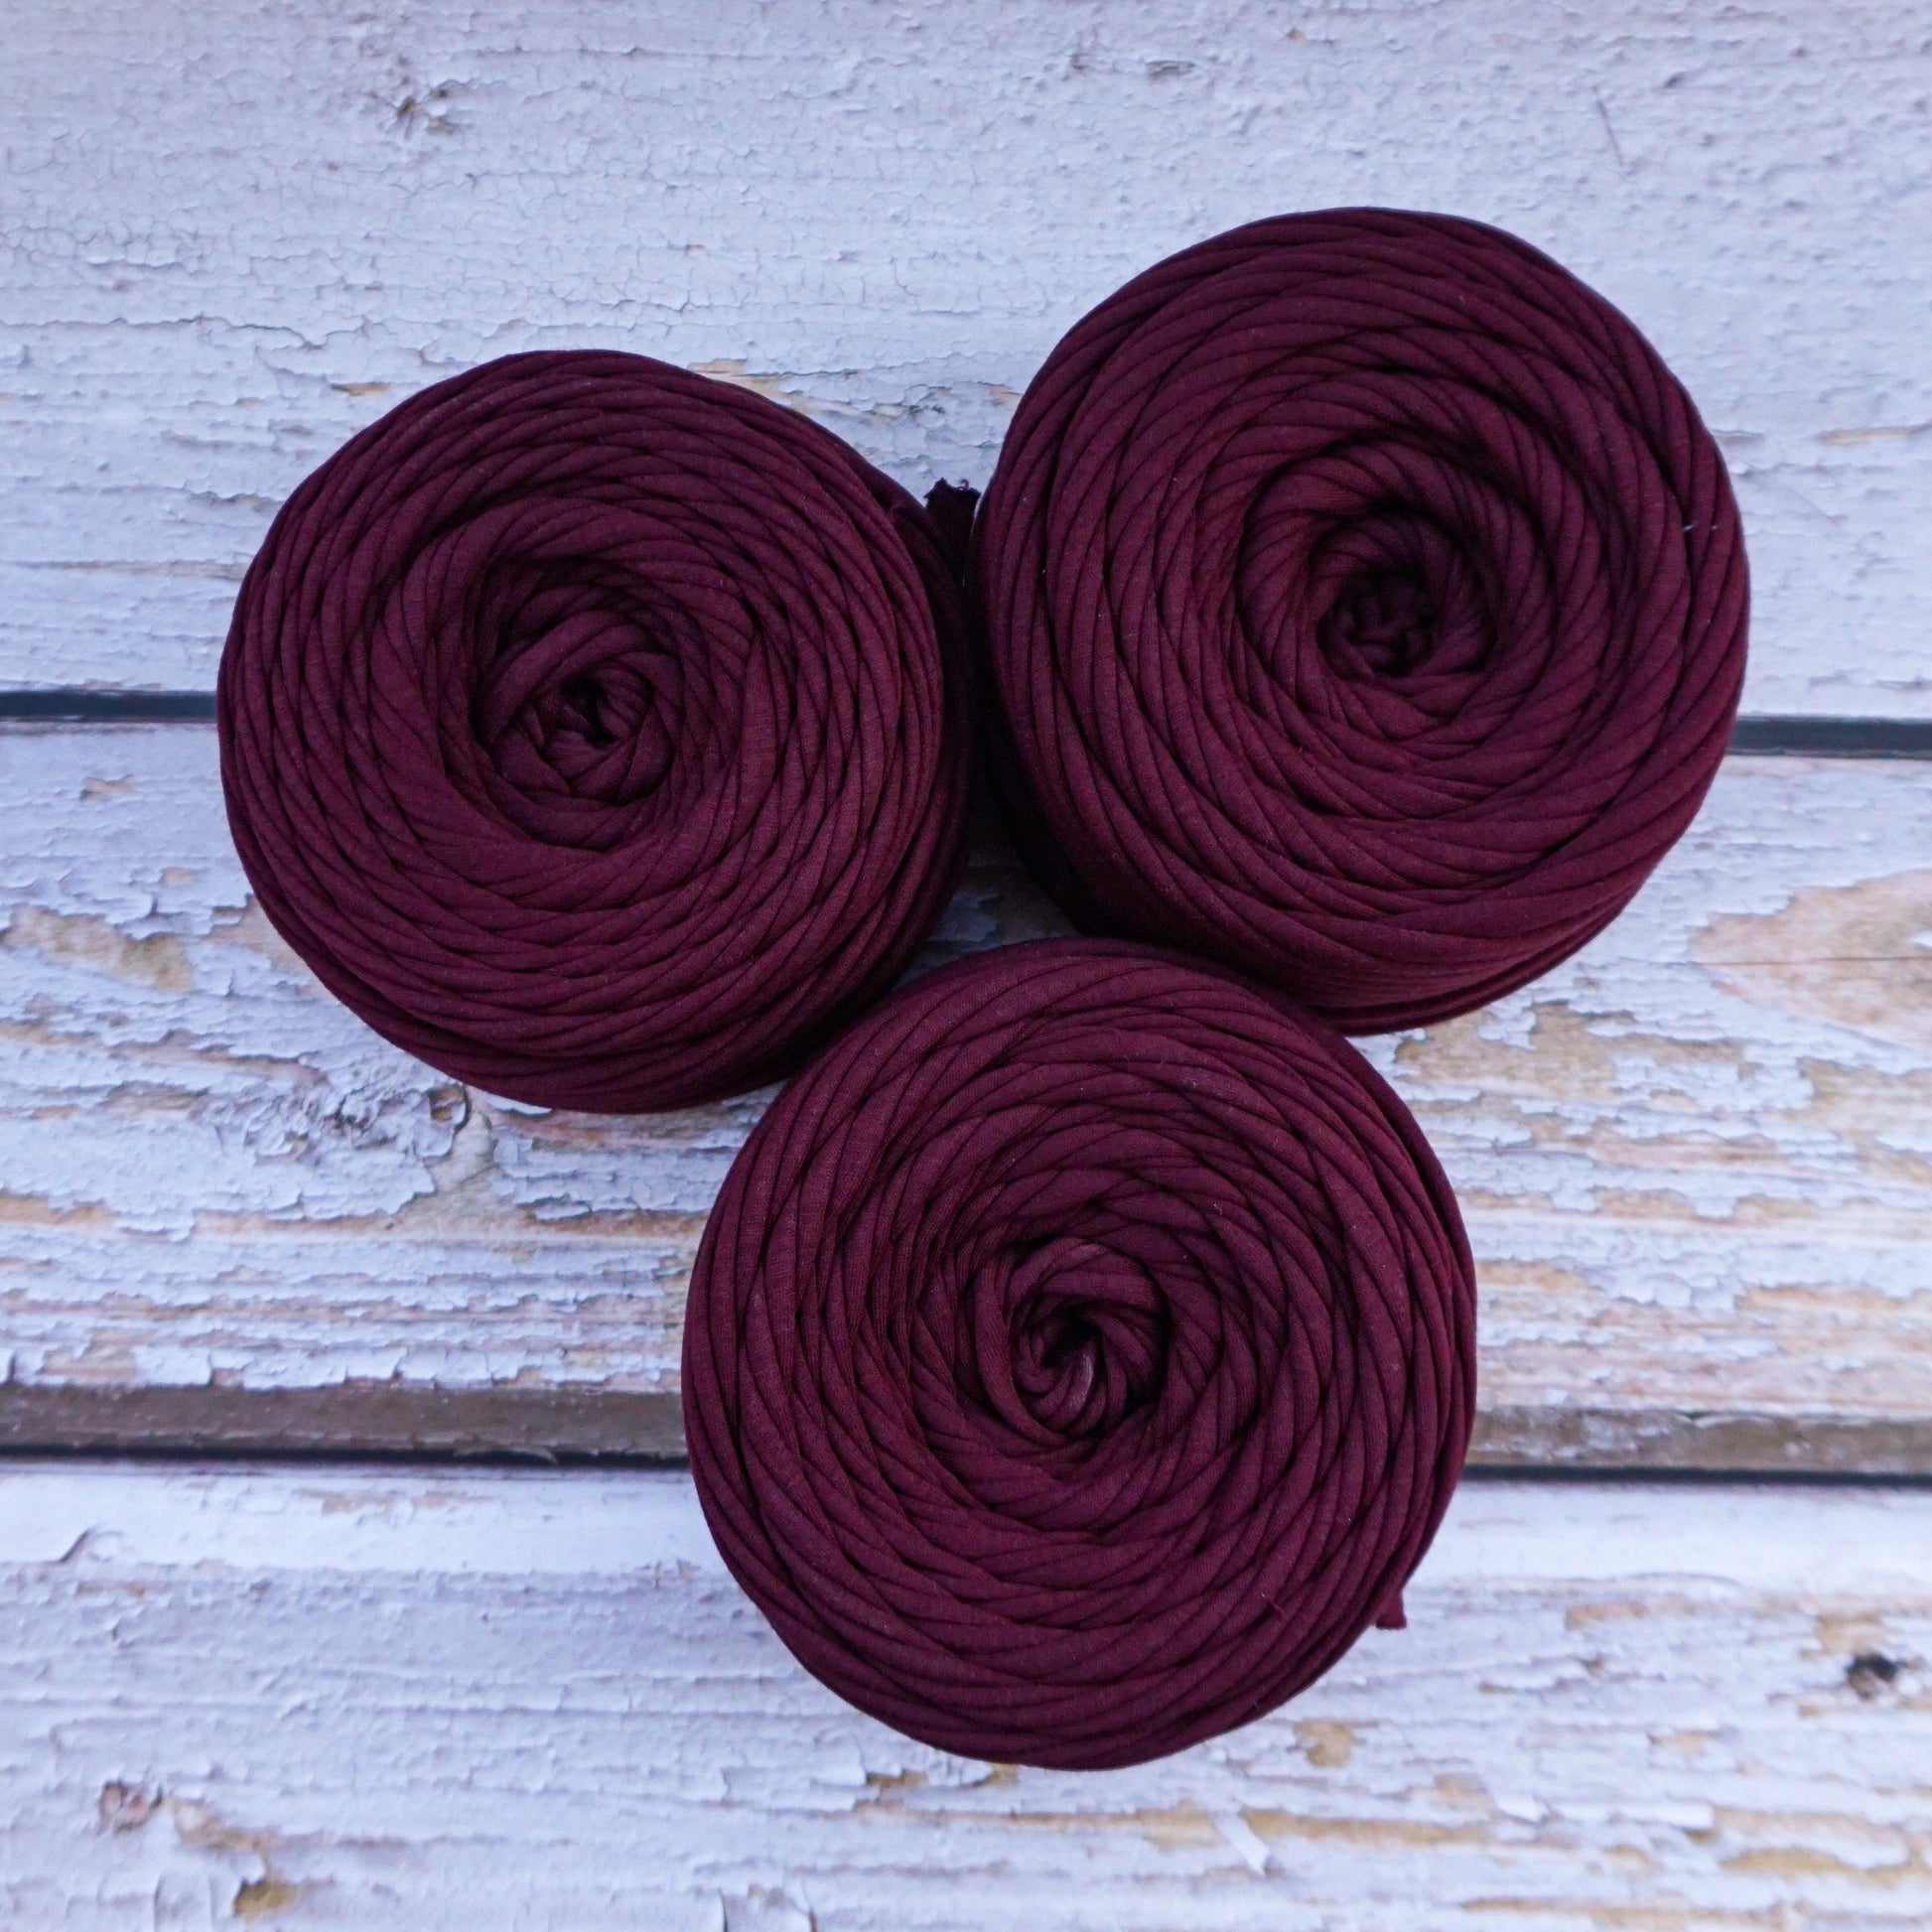 Leather looking T-shirt yarn for crocheting baskets, bags, rugs and ho –  Knitznpurlz